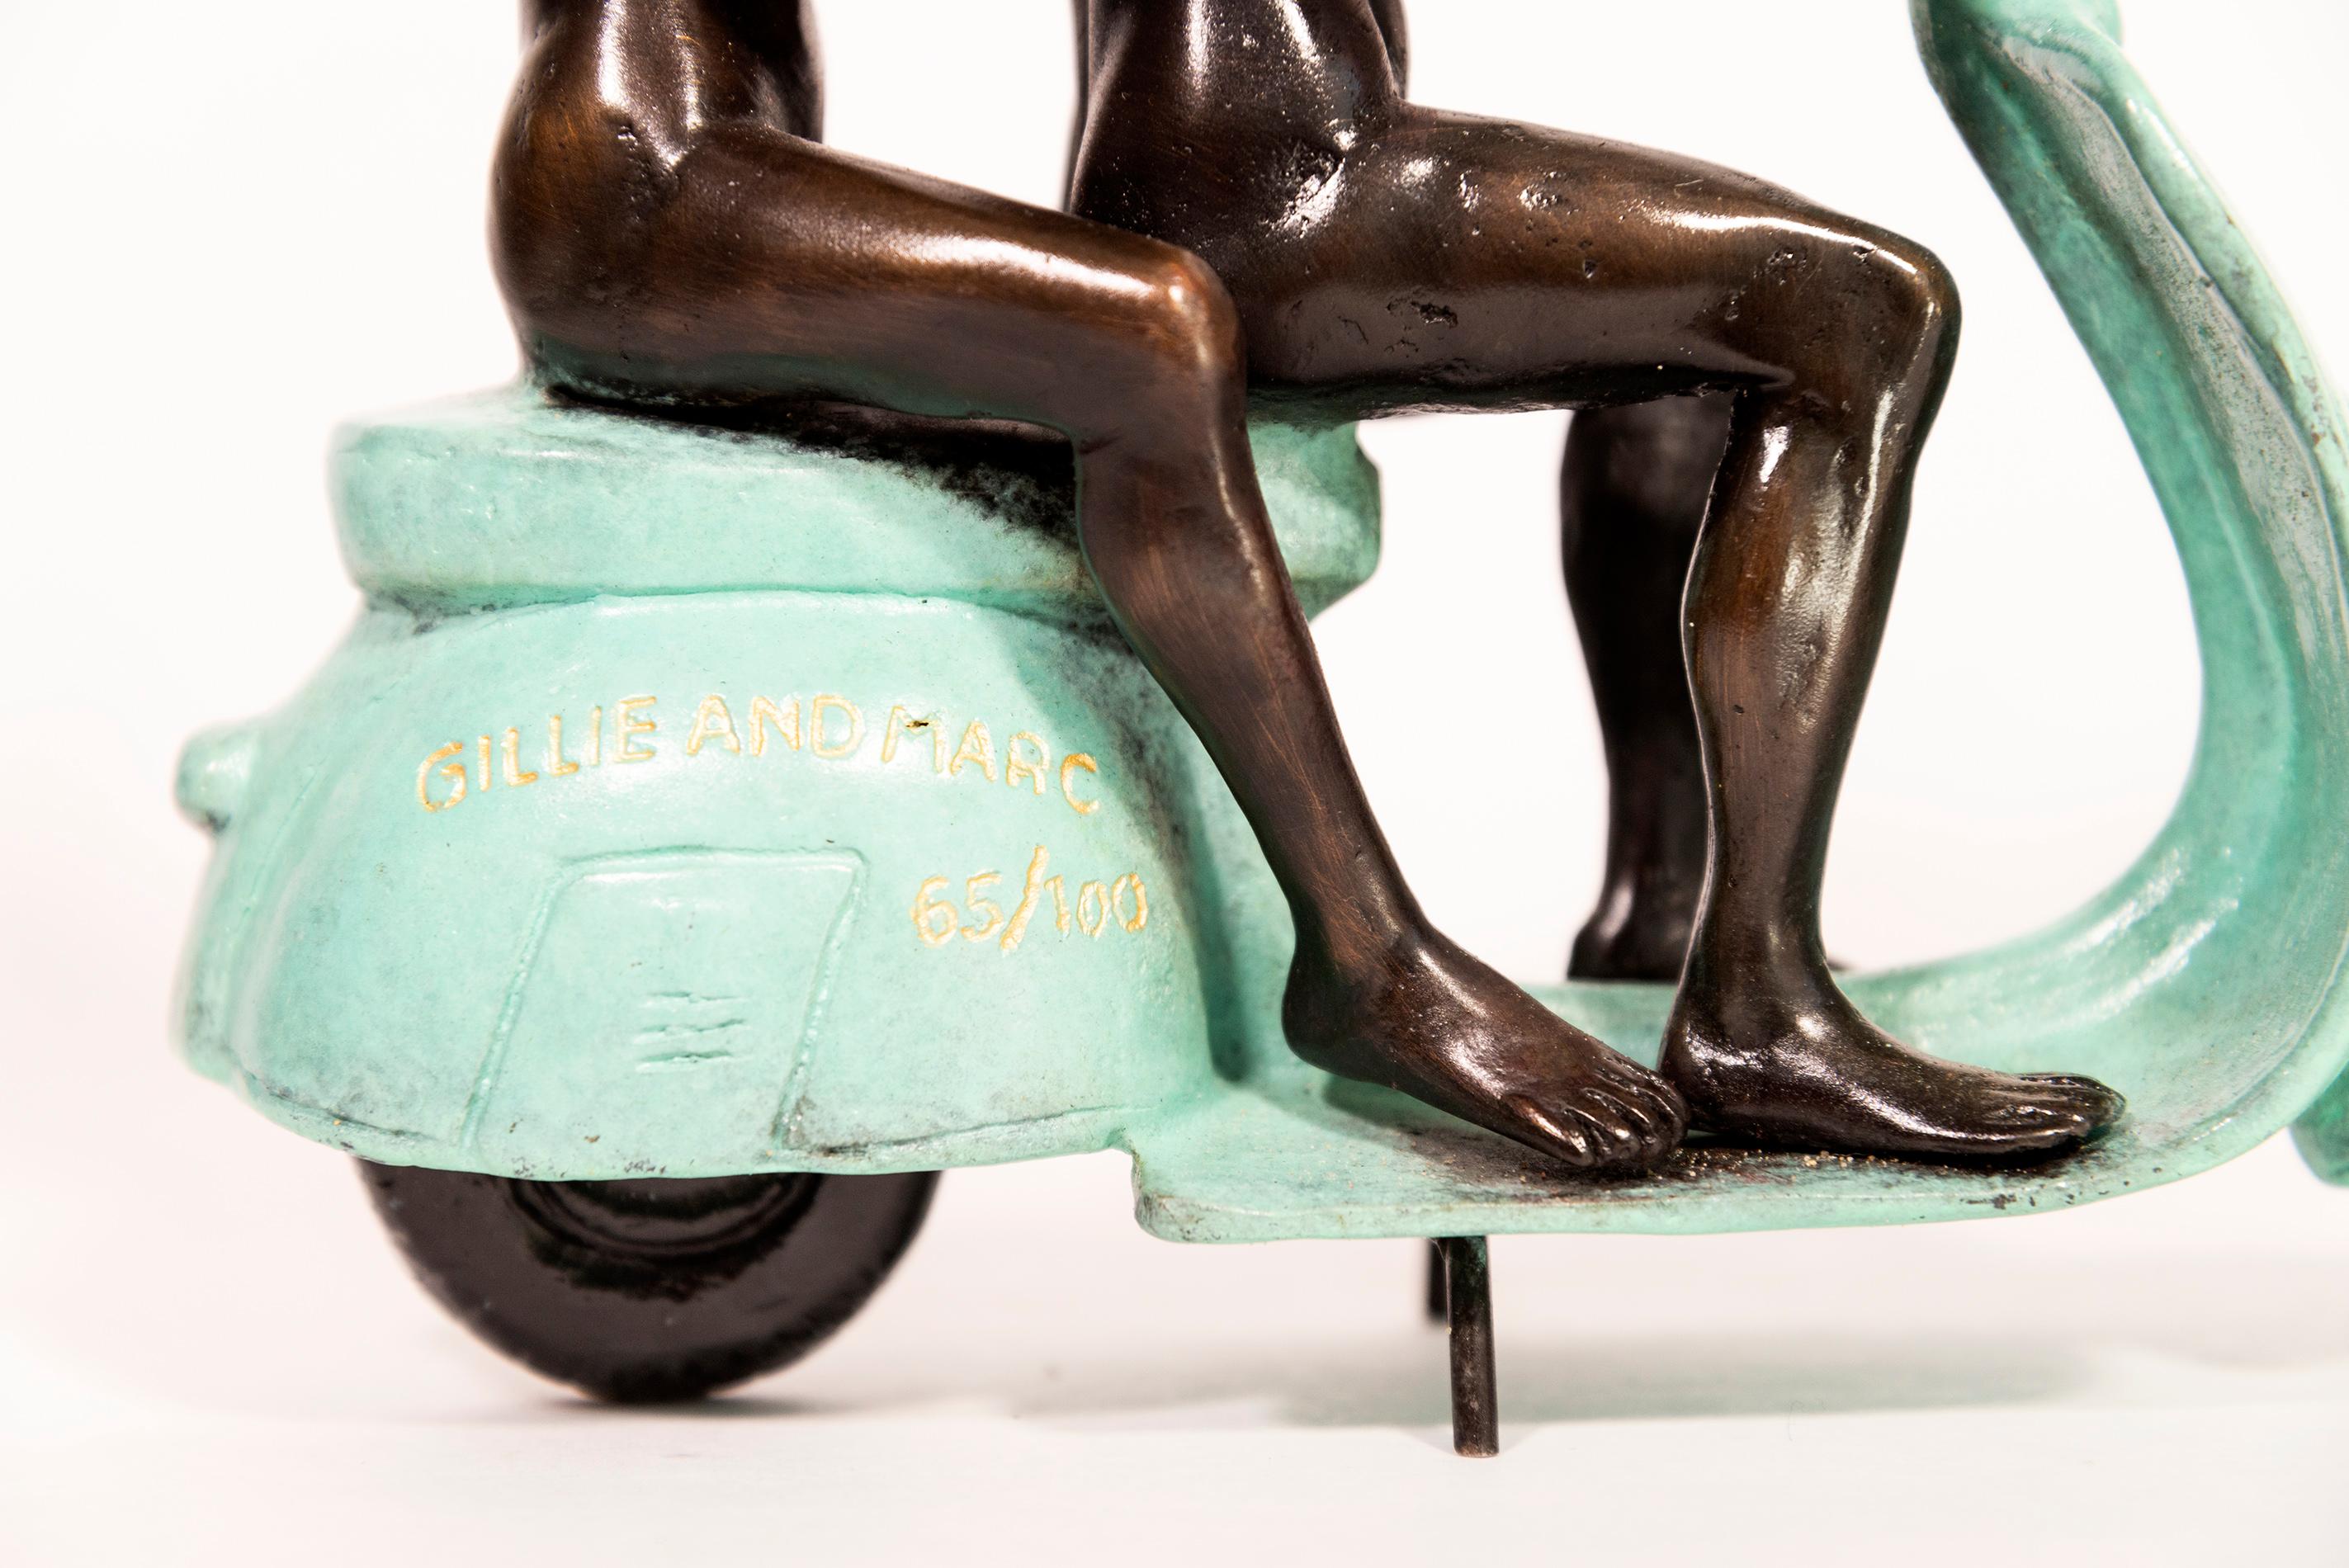 They were authentic Vespa riders in Rome 65/100 - figurative, bronze sculpture - Contemporary Sculpture by Gillie and Marc Schattner